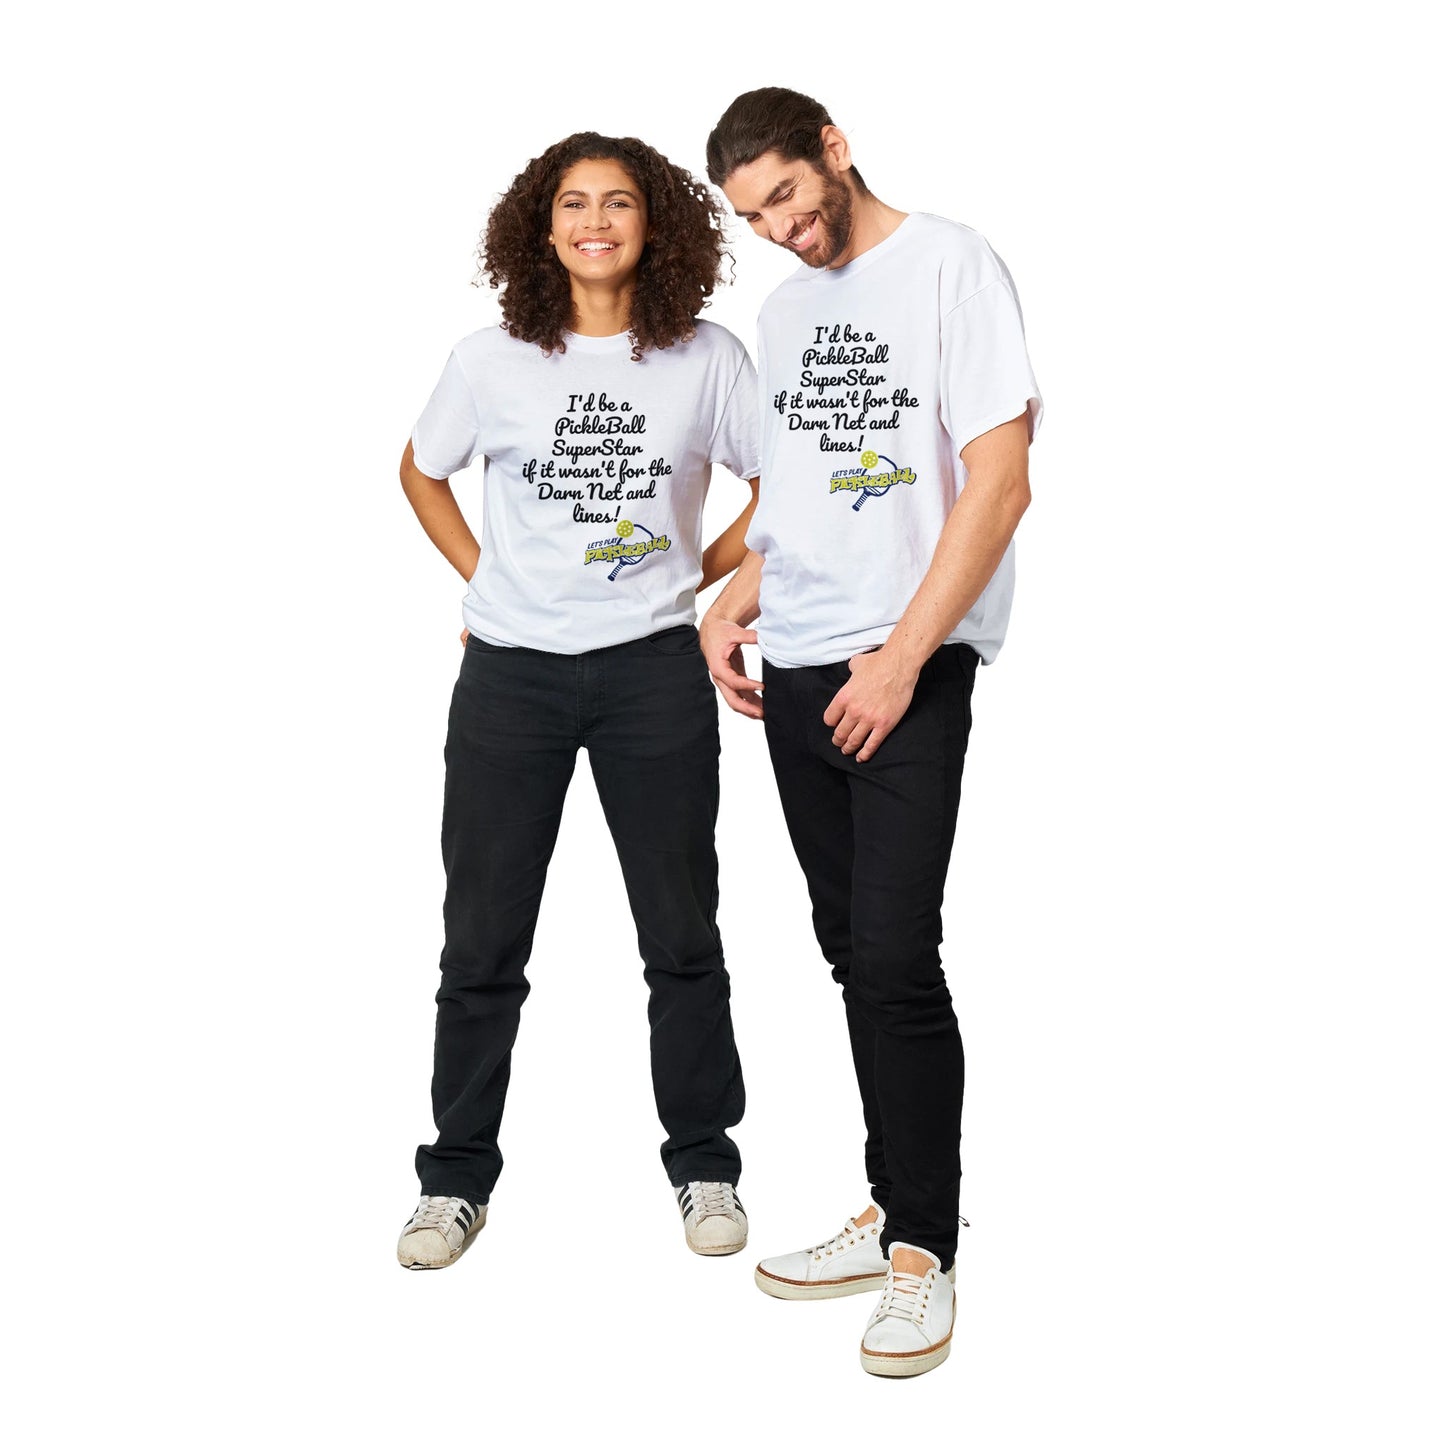 A white comfortable Unisex Crewneck heavyweight cotton t-shirt with funny saying I’d be a PickleBall SuperStar if it wasn’t for the Darn Net and Lines and Let’s Play Pickleball logo on the front from WhatYa Say Apparel worn by Happy woman and man couple standing side by side.